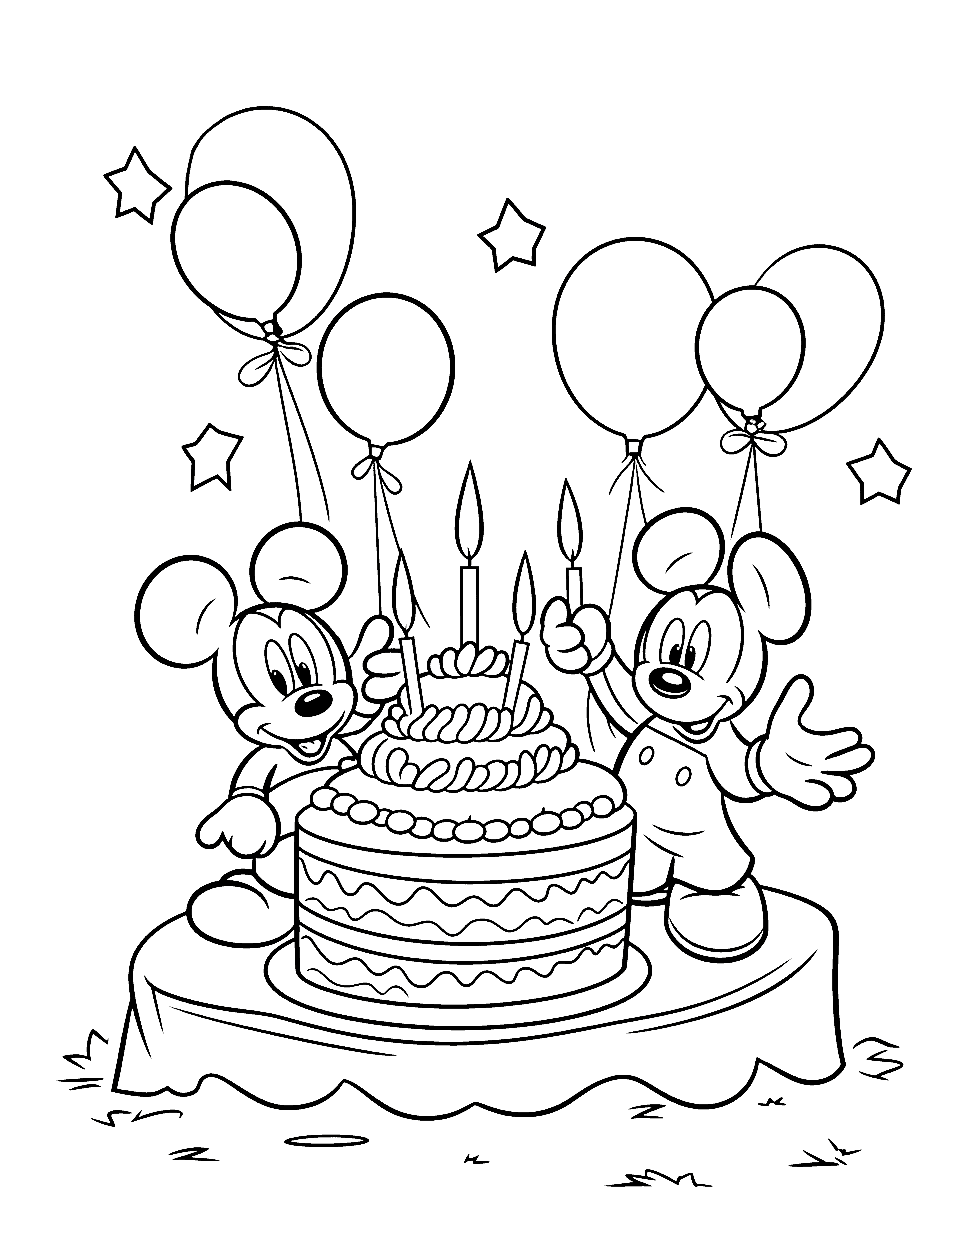 Mickey Mouse's Birthday Bash Happy Coloring Page - Mickey Mouse enjoying a birthday cake.